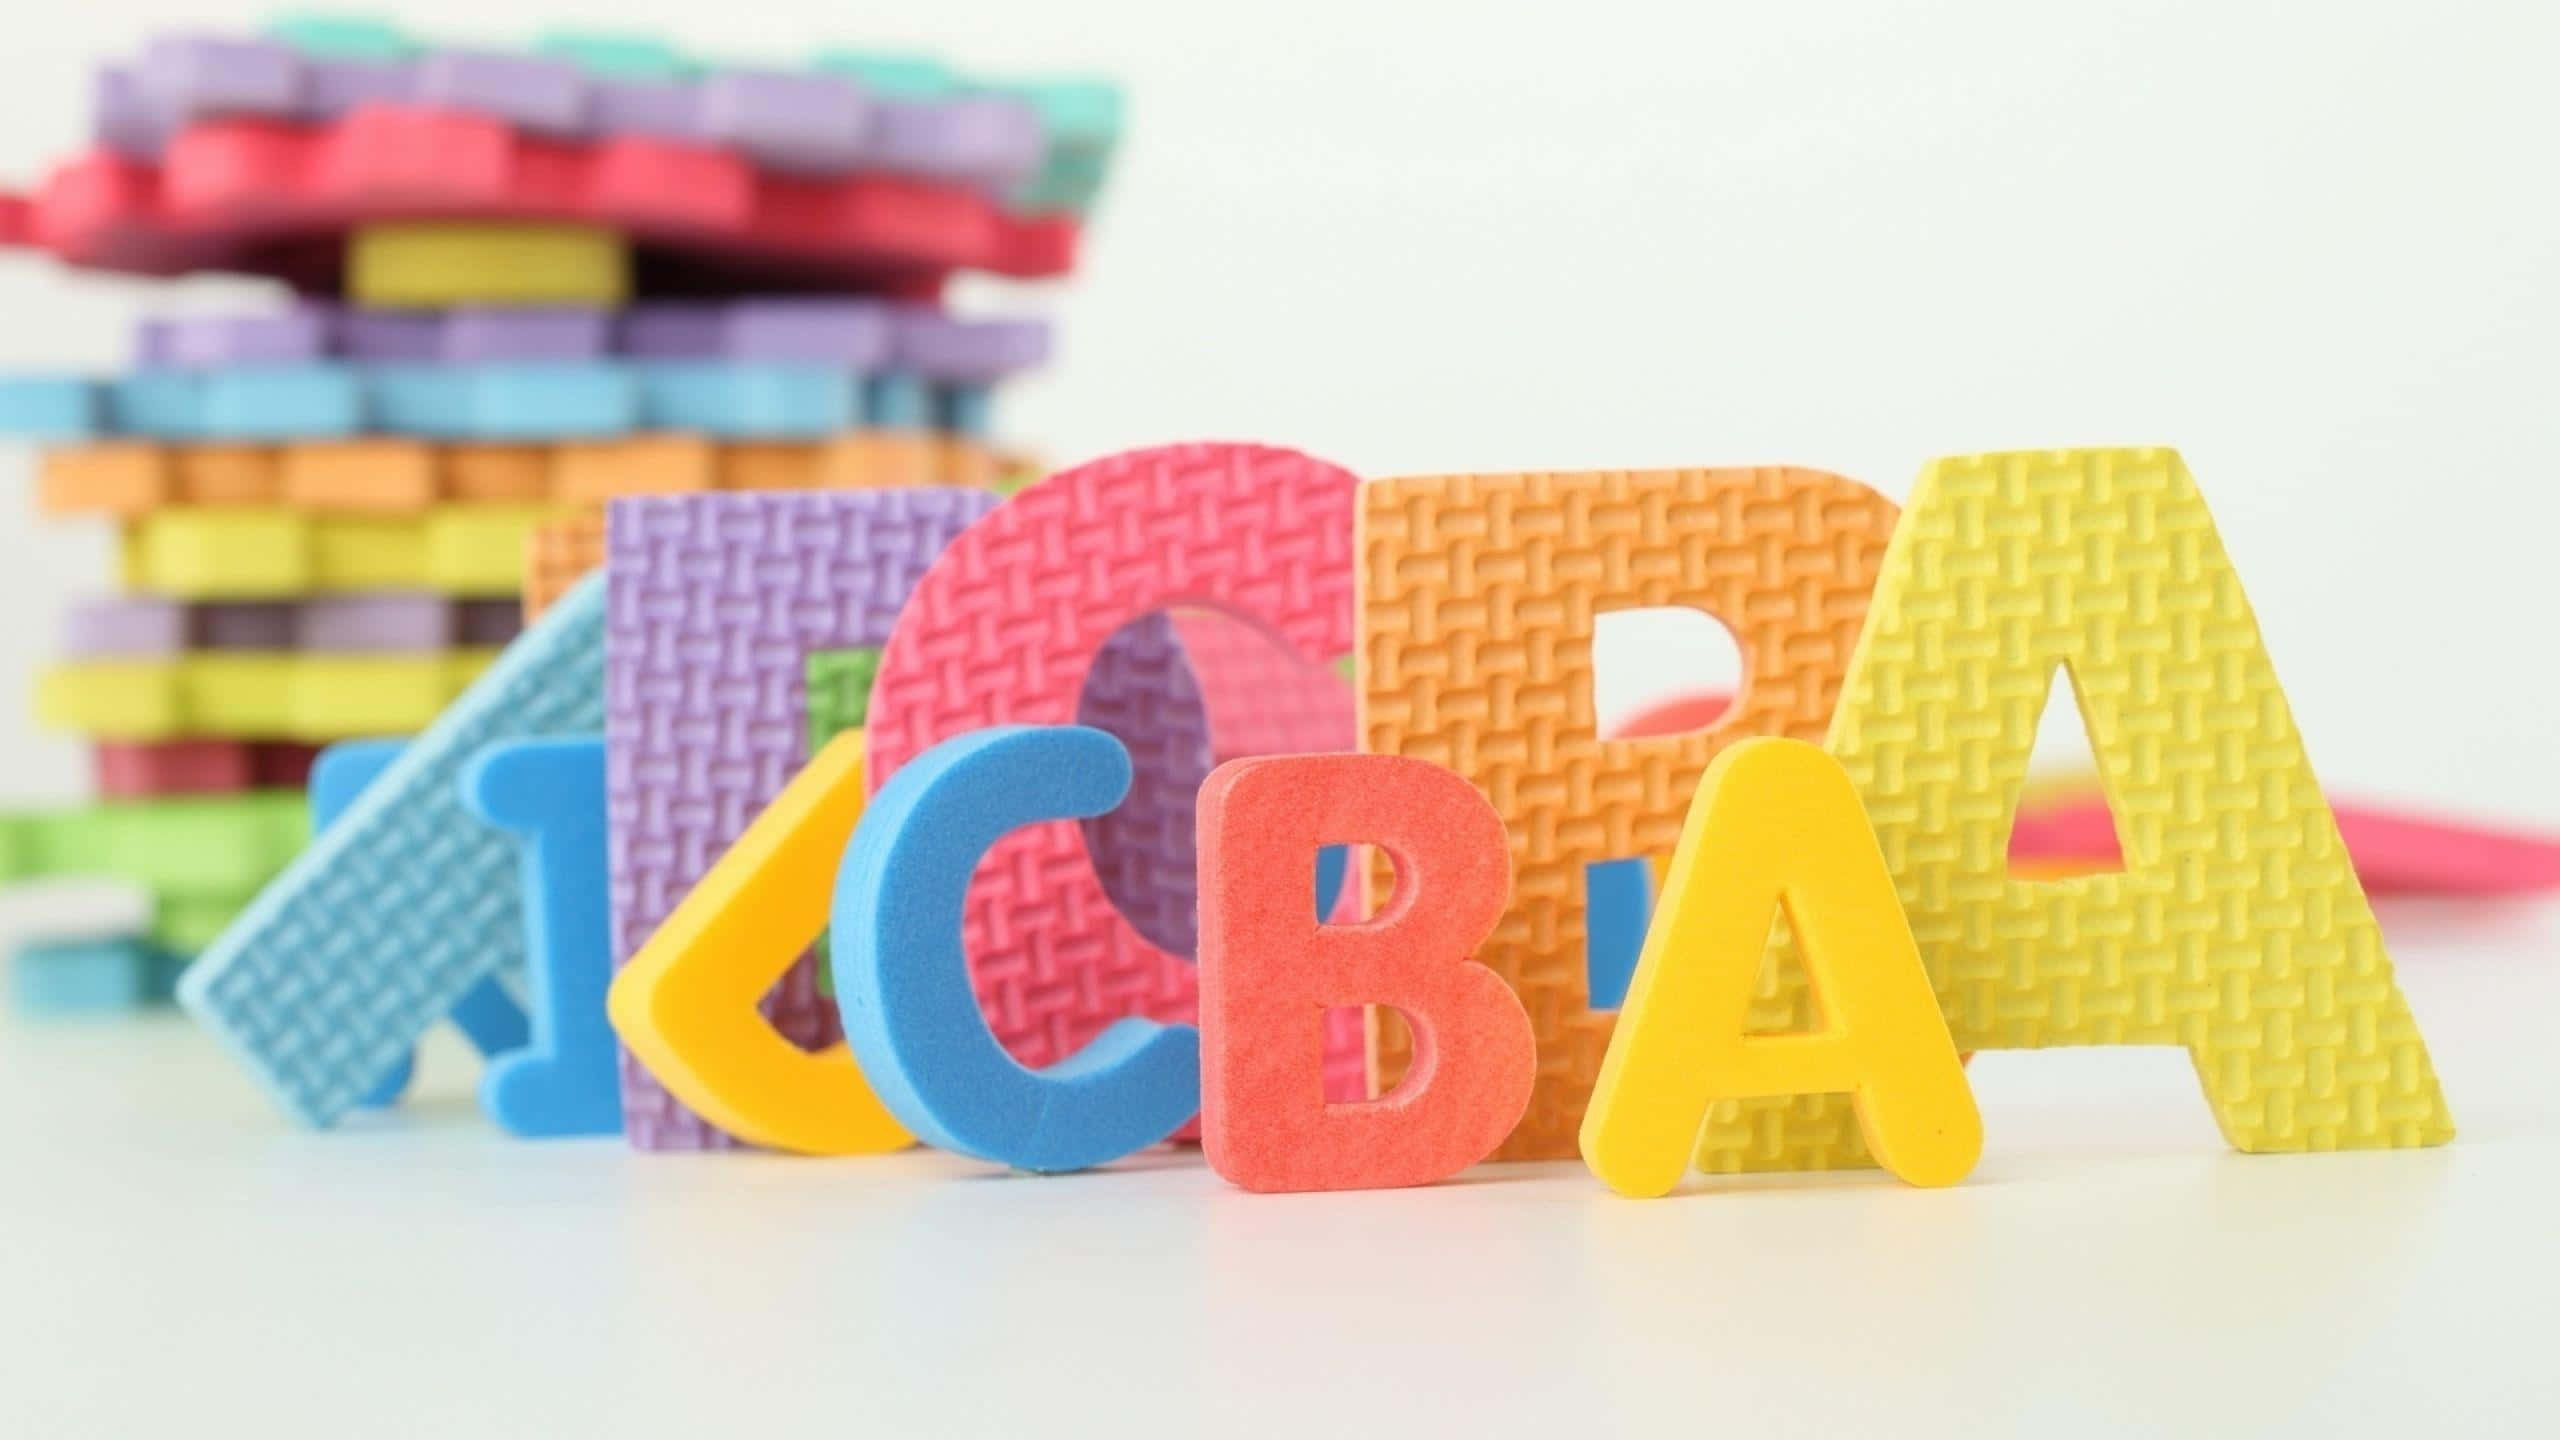 Colorful Alphabet Blocks With The Word Abacus